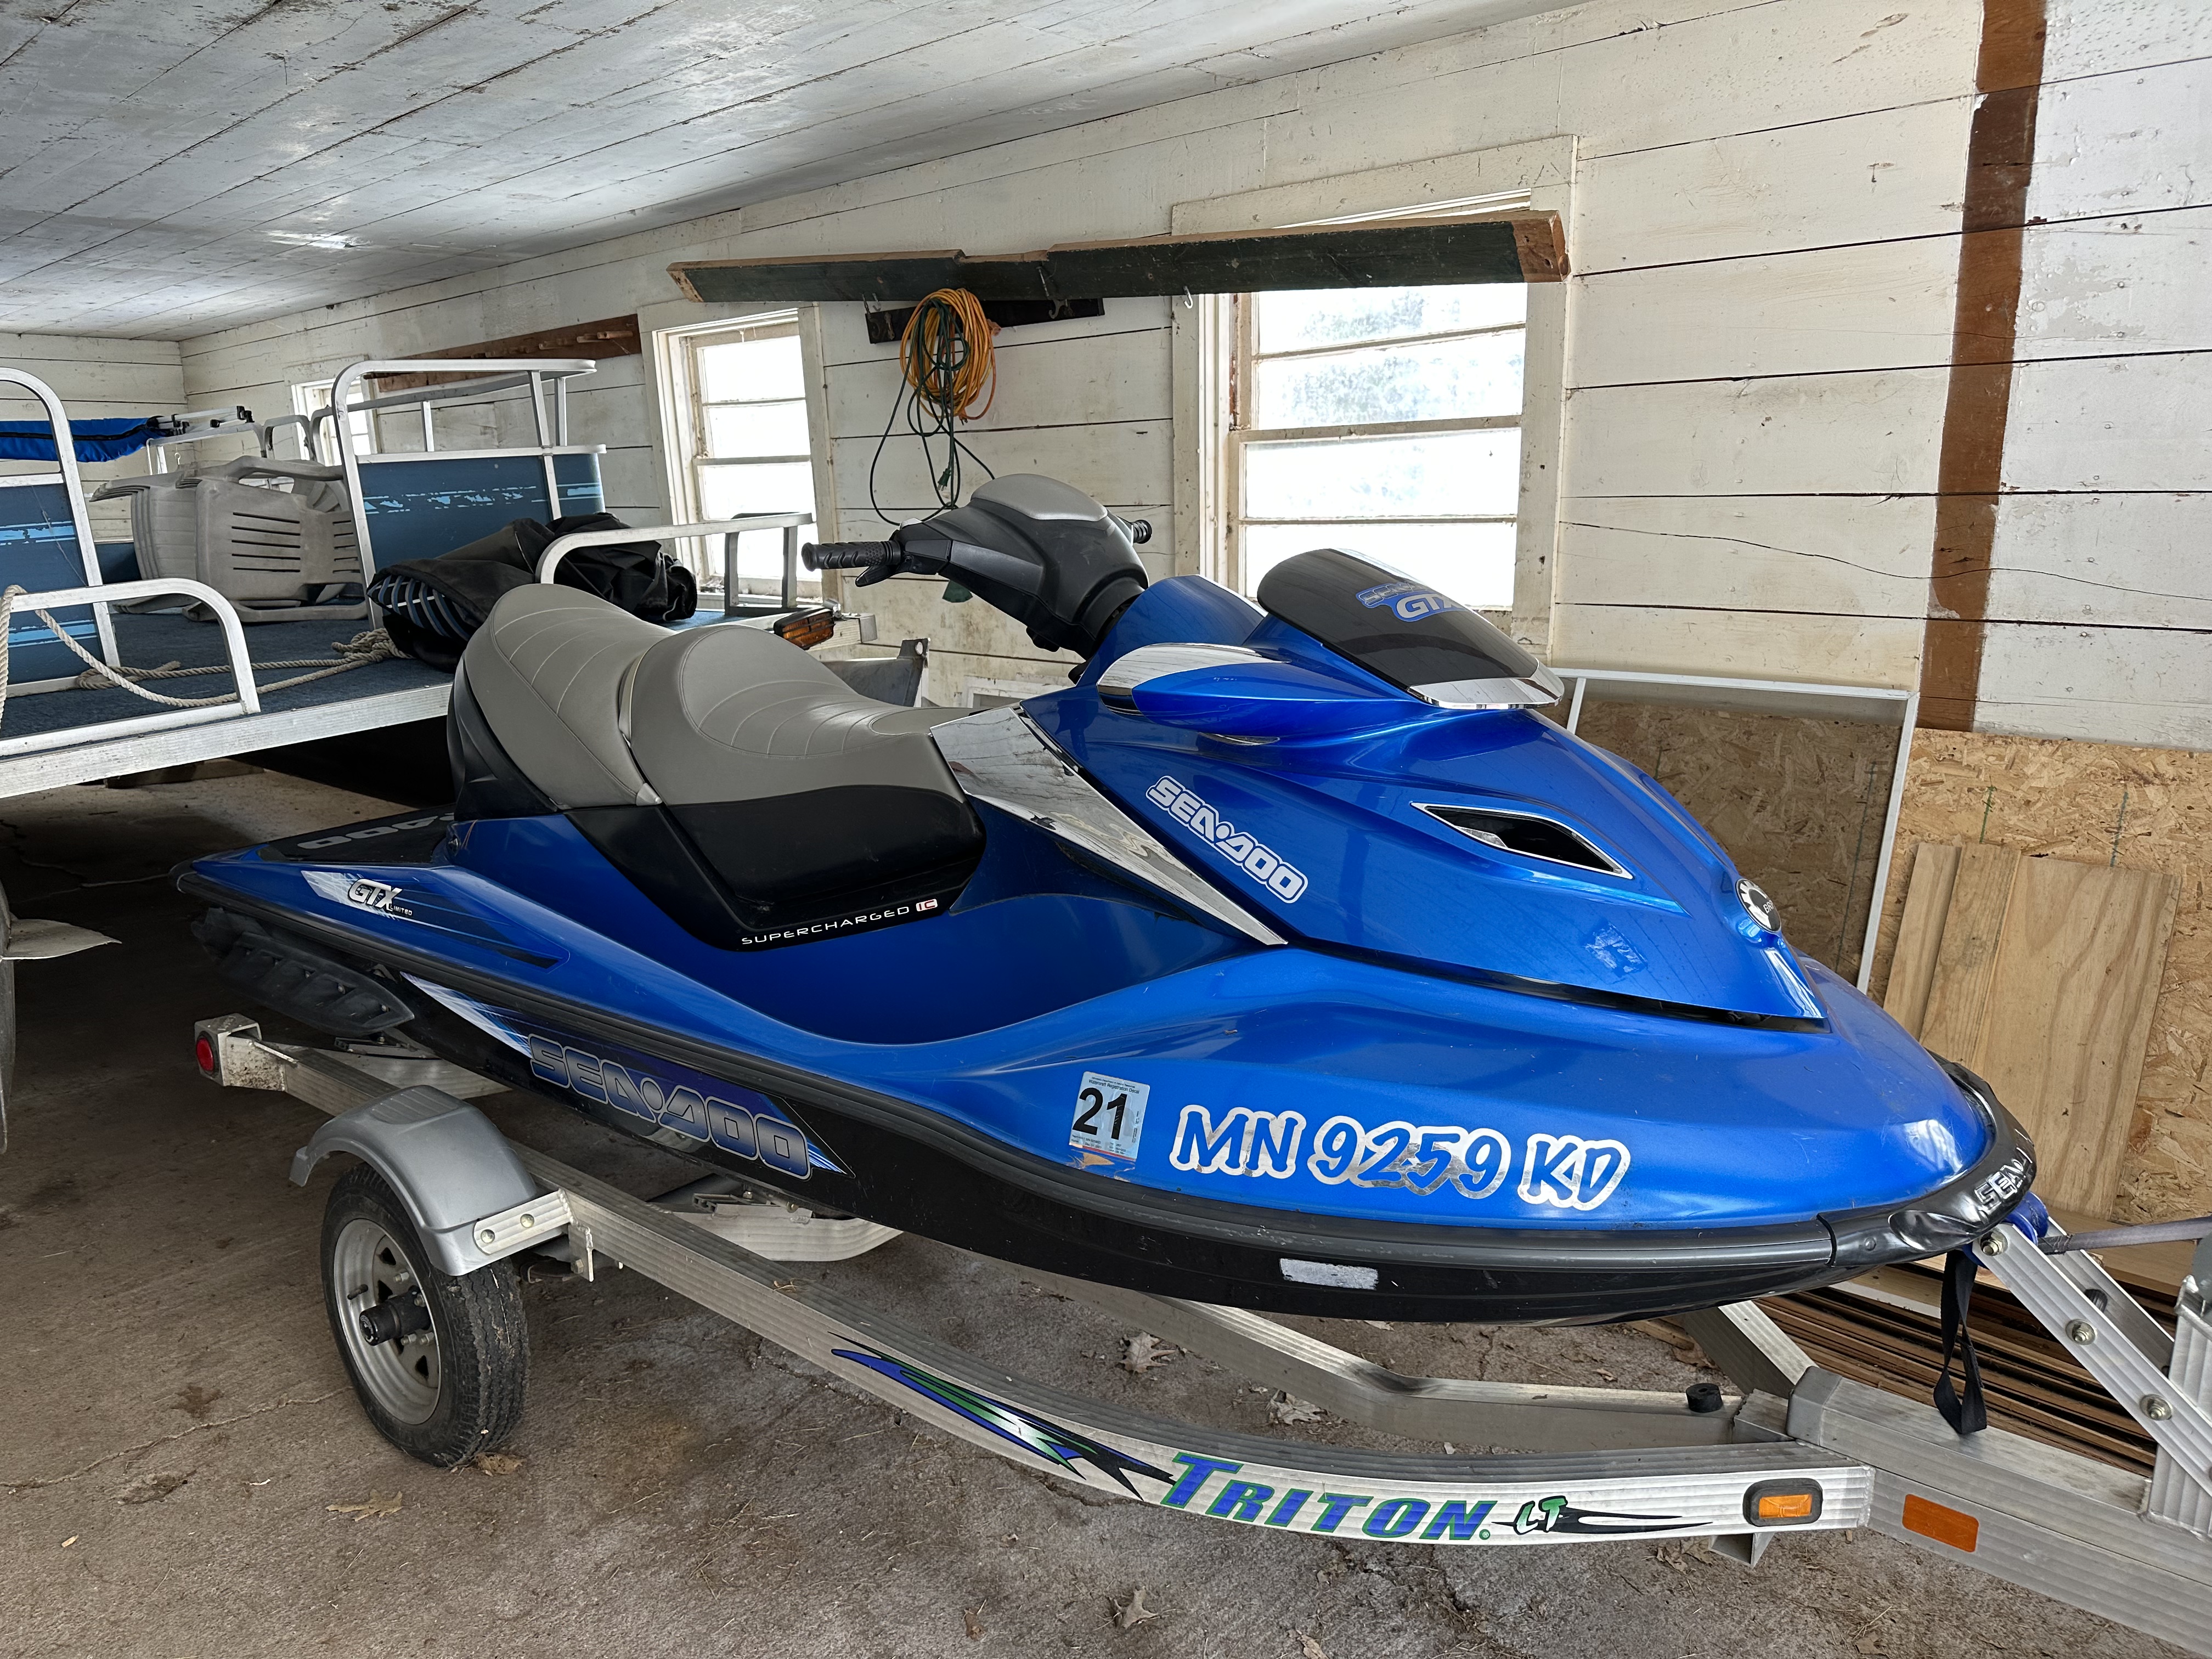 2007 10 foot Sea-Doo GTX limited PWC for sale in Maple Grove, MN - image 7 